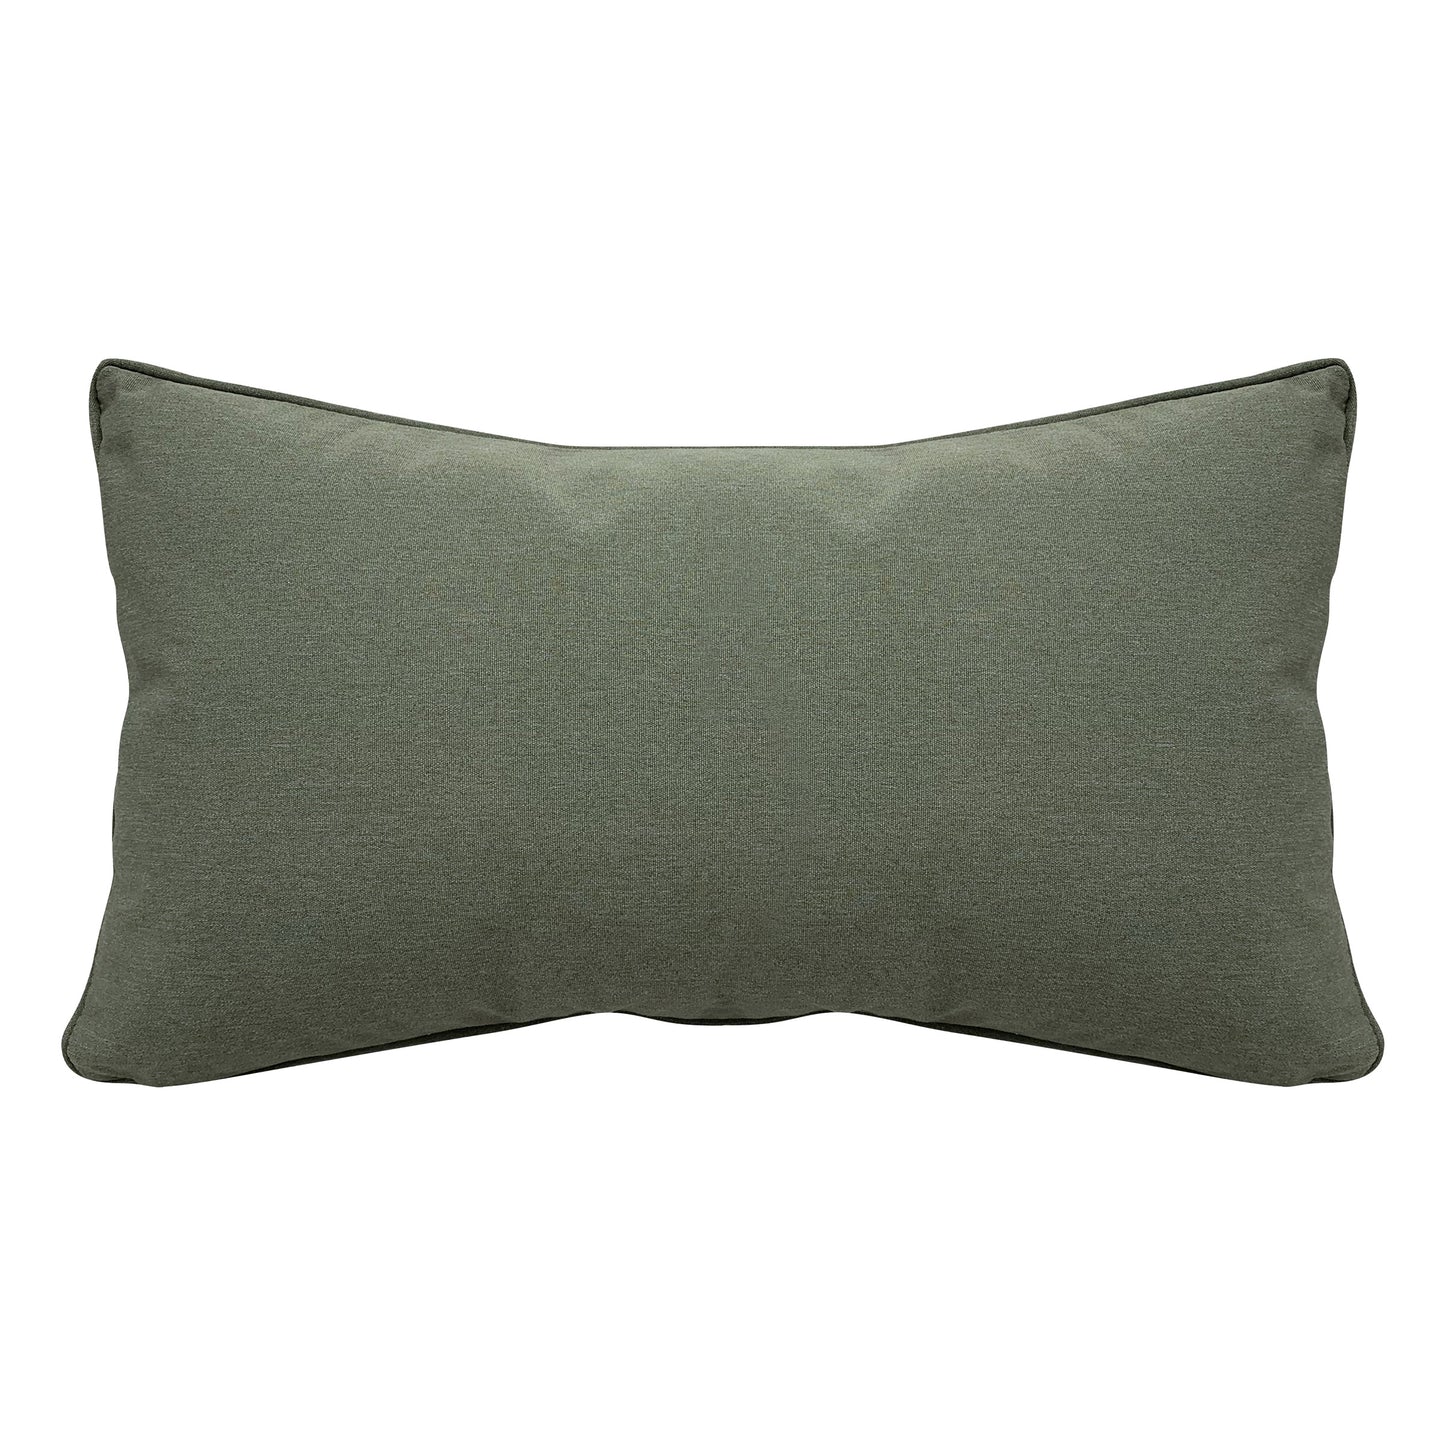 Solid green fabric; back side of the Cardinals & Pines holiday pillow.